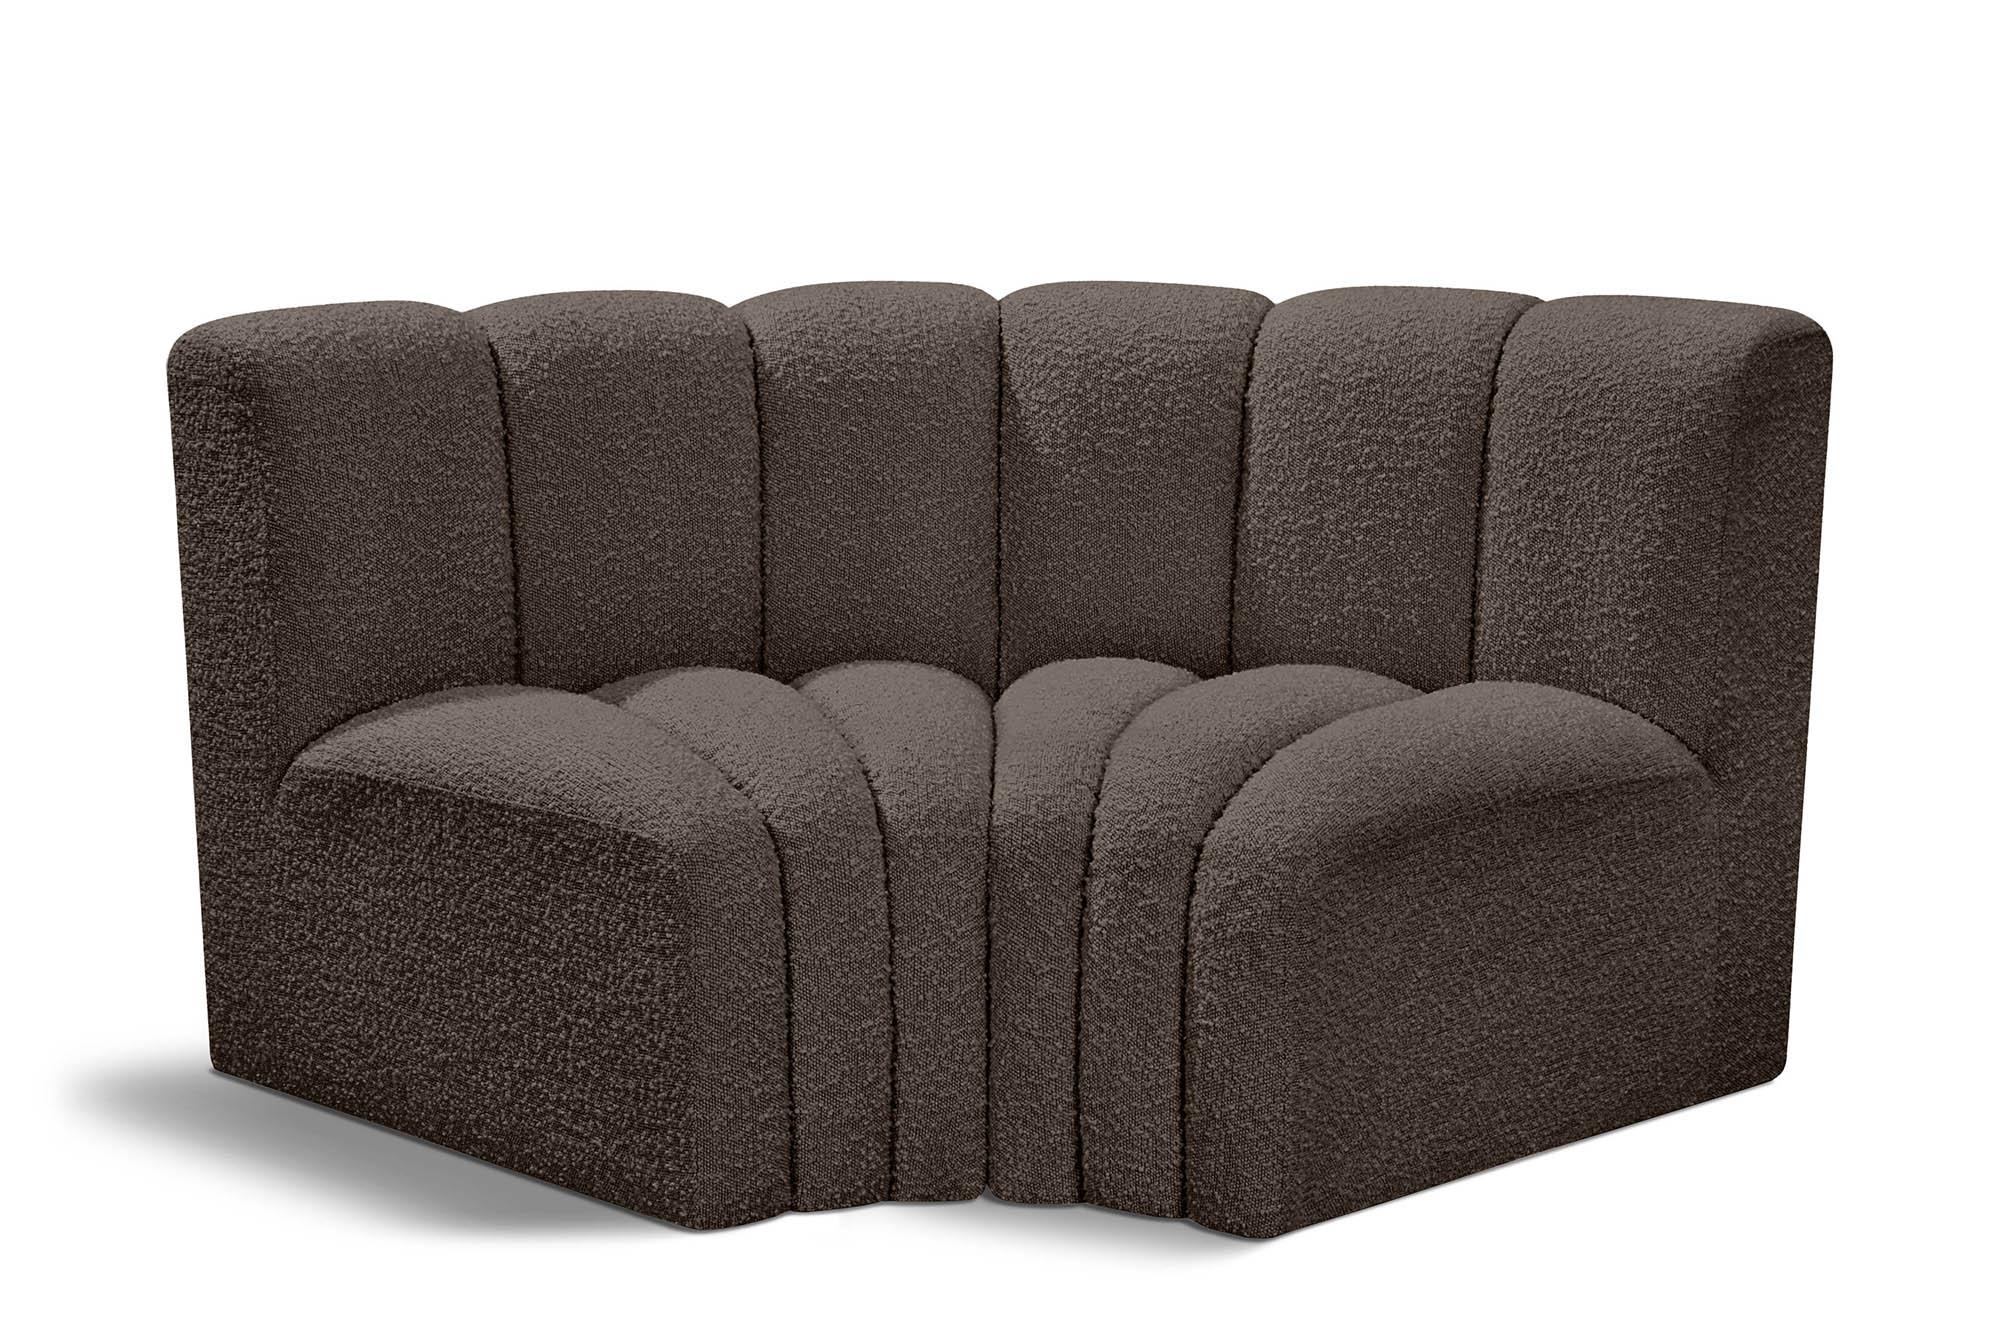 Contemporary, Modern Modular Sectional Sofa ARC 102Brown-S2B 102Brown-S2B in Brown 